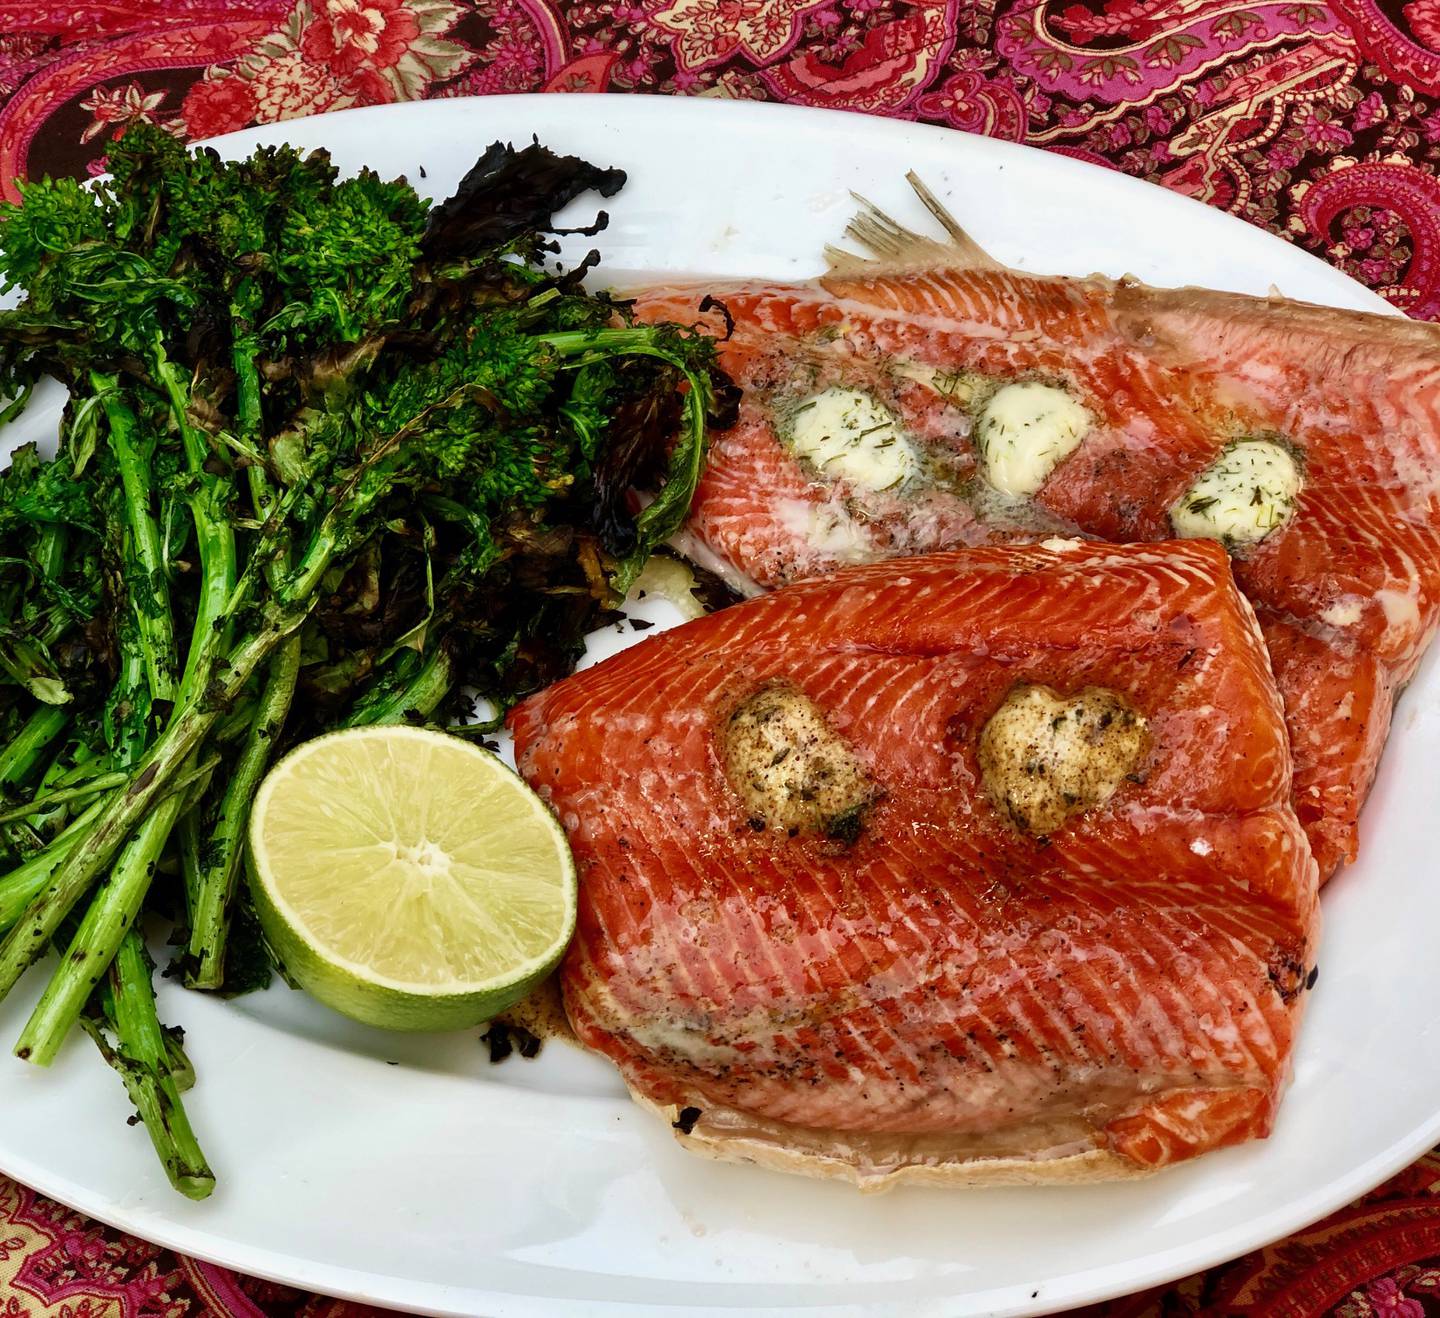 Grilled salmon topped with compound butter